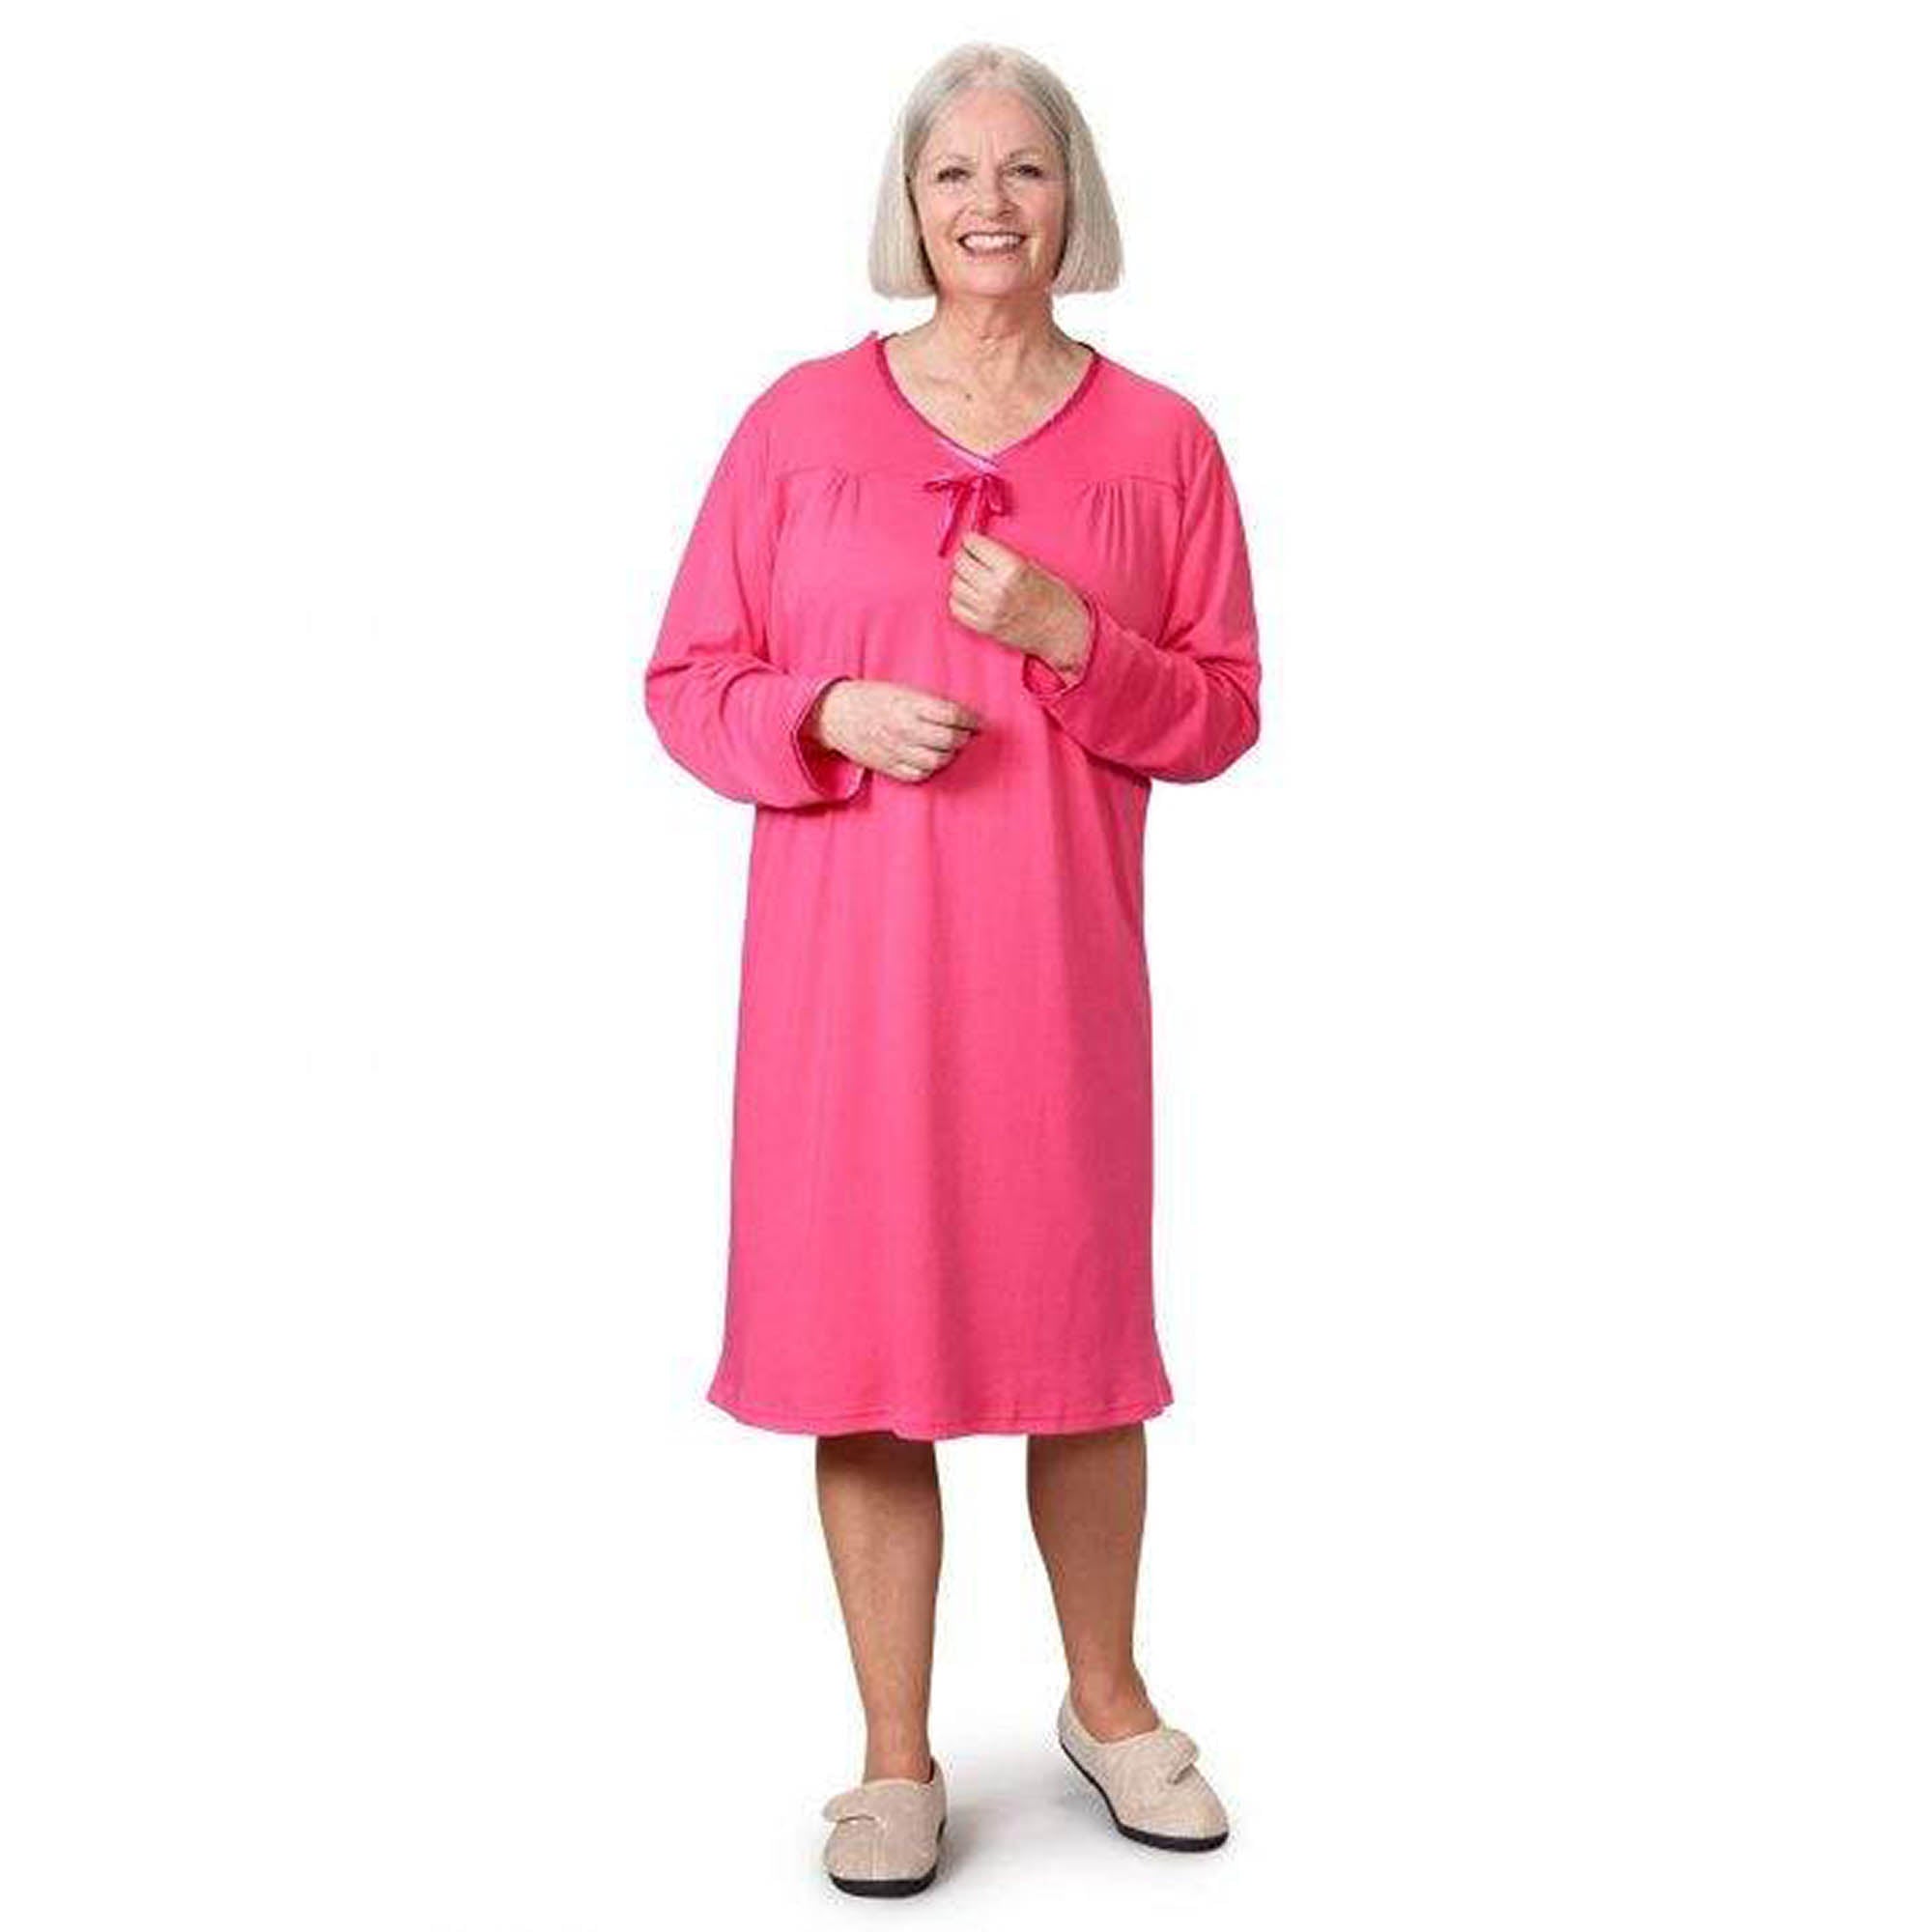 Silverts Women's Open Back Antimicrobial Long-sleeve Nightgown - Adaptive Clothing - Pink - L